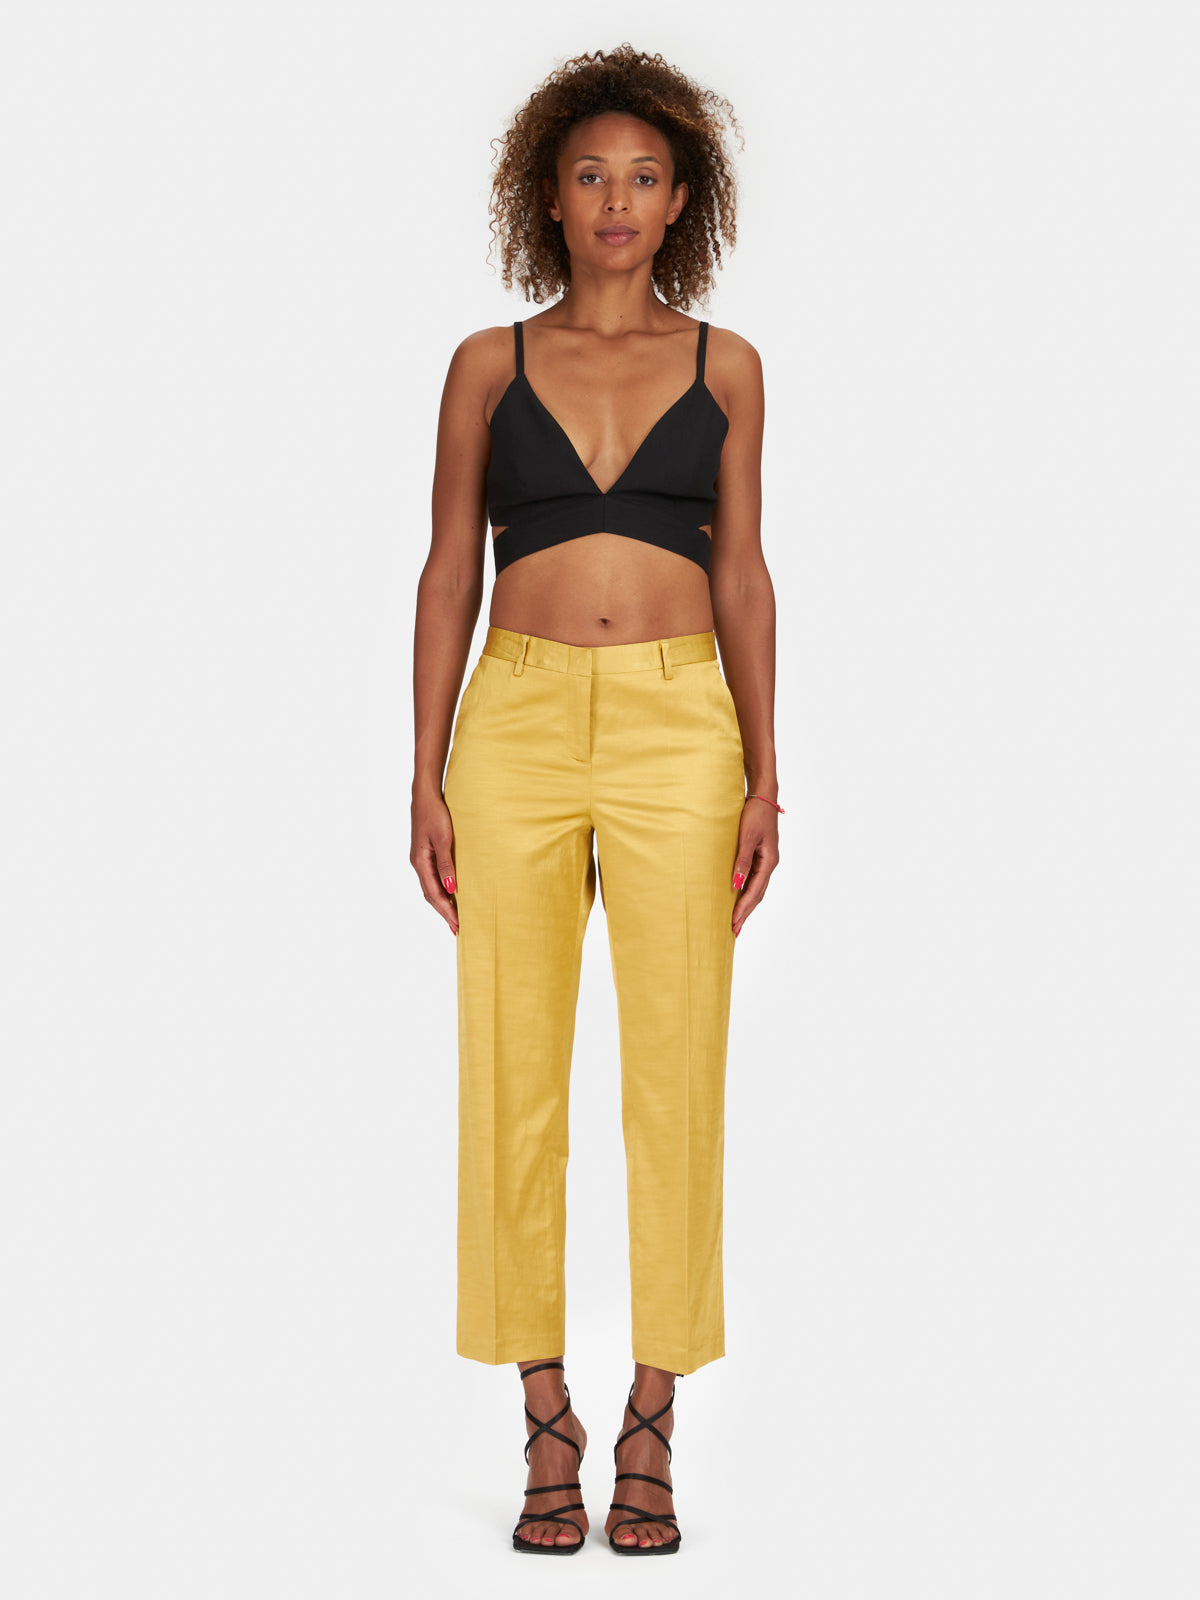 Straight trousers in honey-colored cotton satin